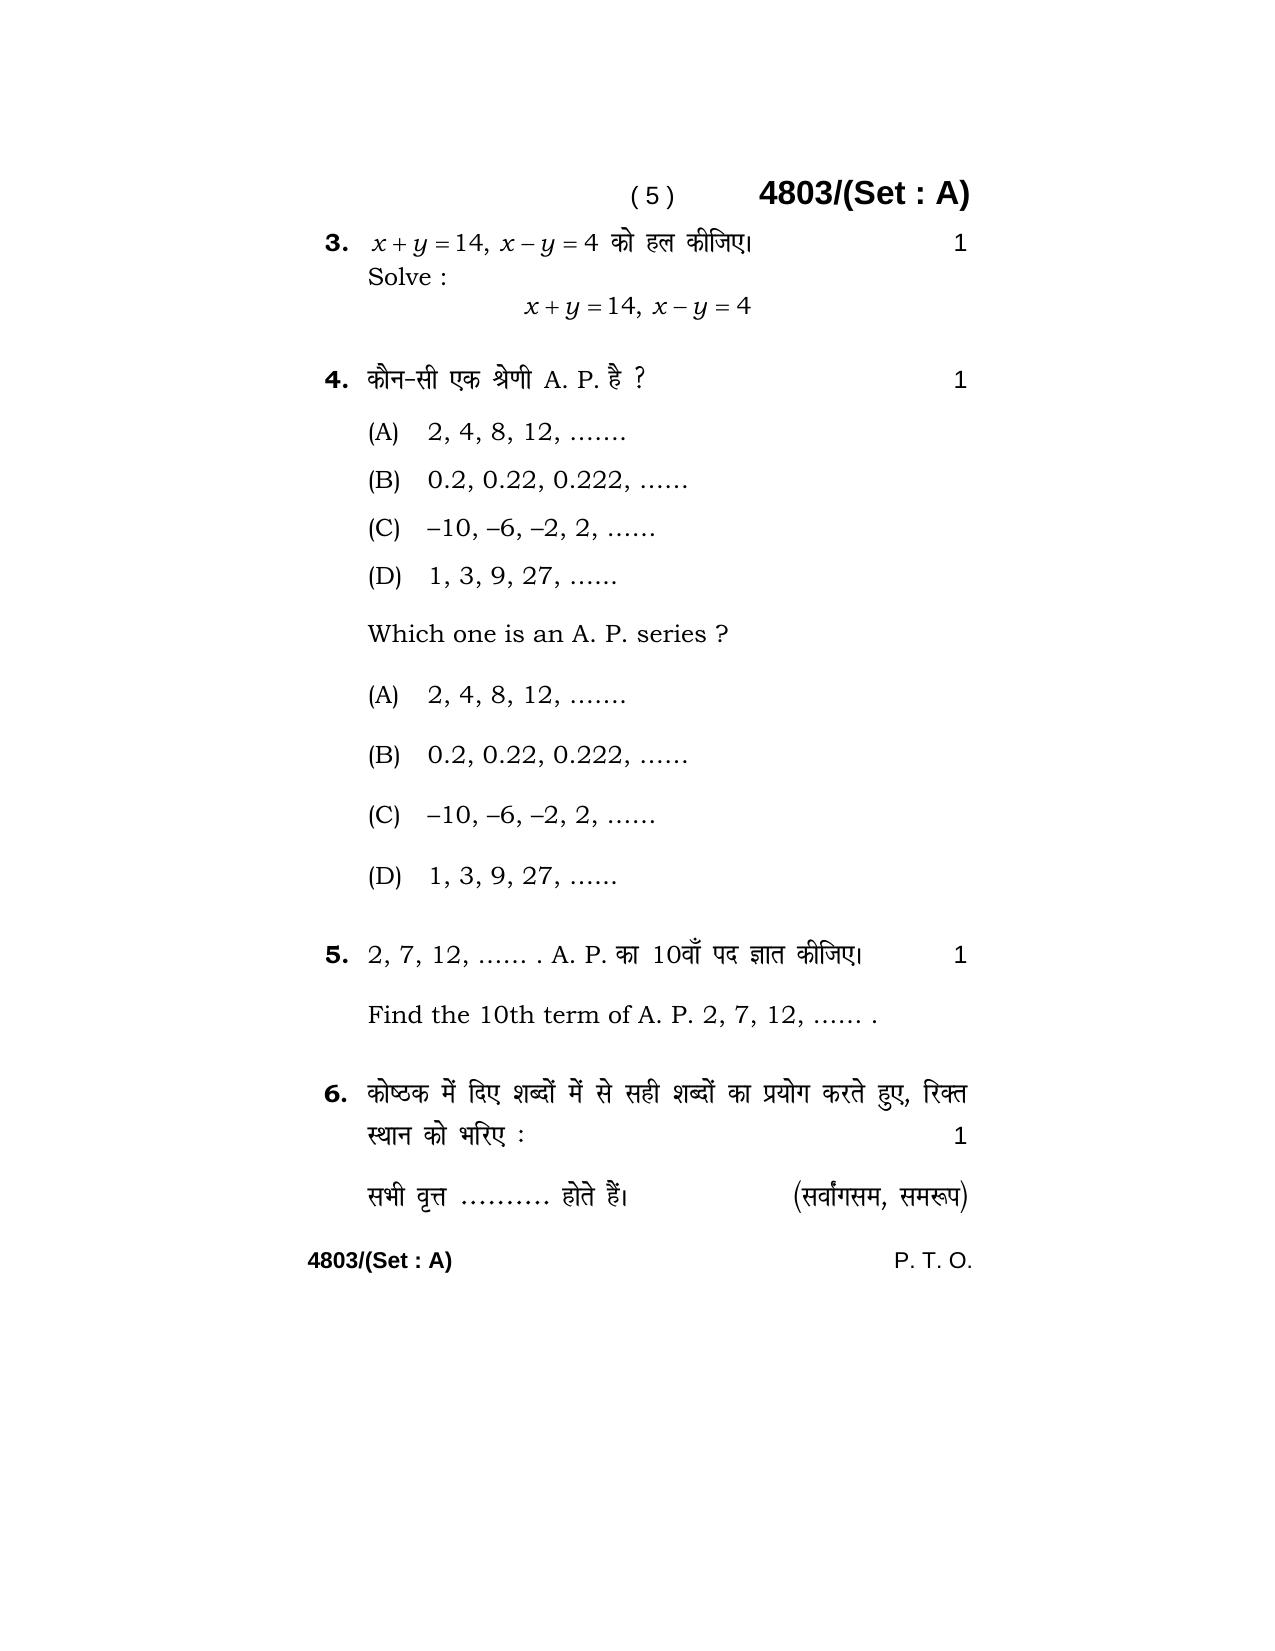 Haryana Board HBSE Class 10 Mathematics 2020 Question Paper - Page 5